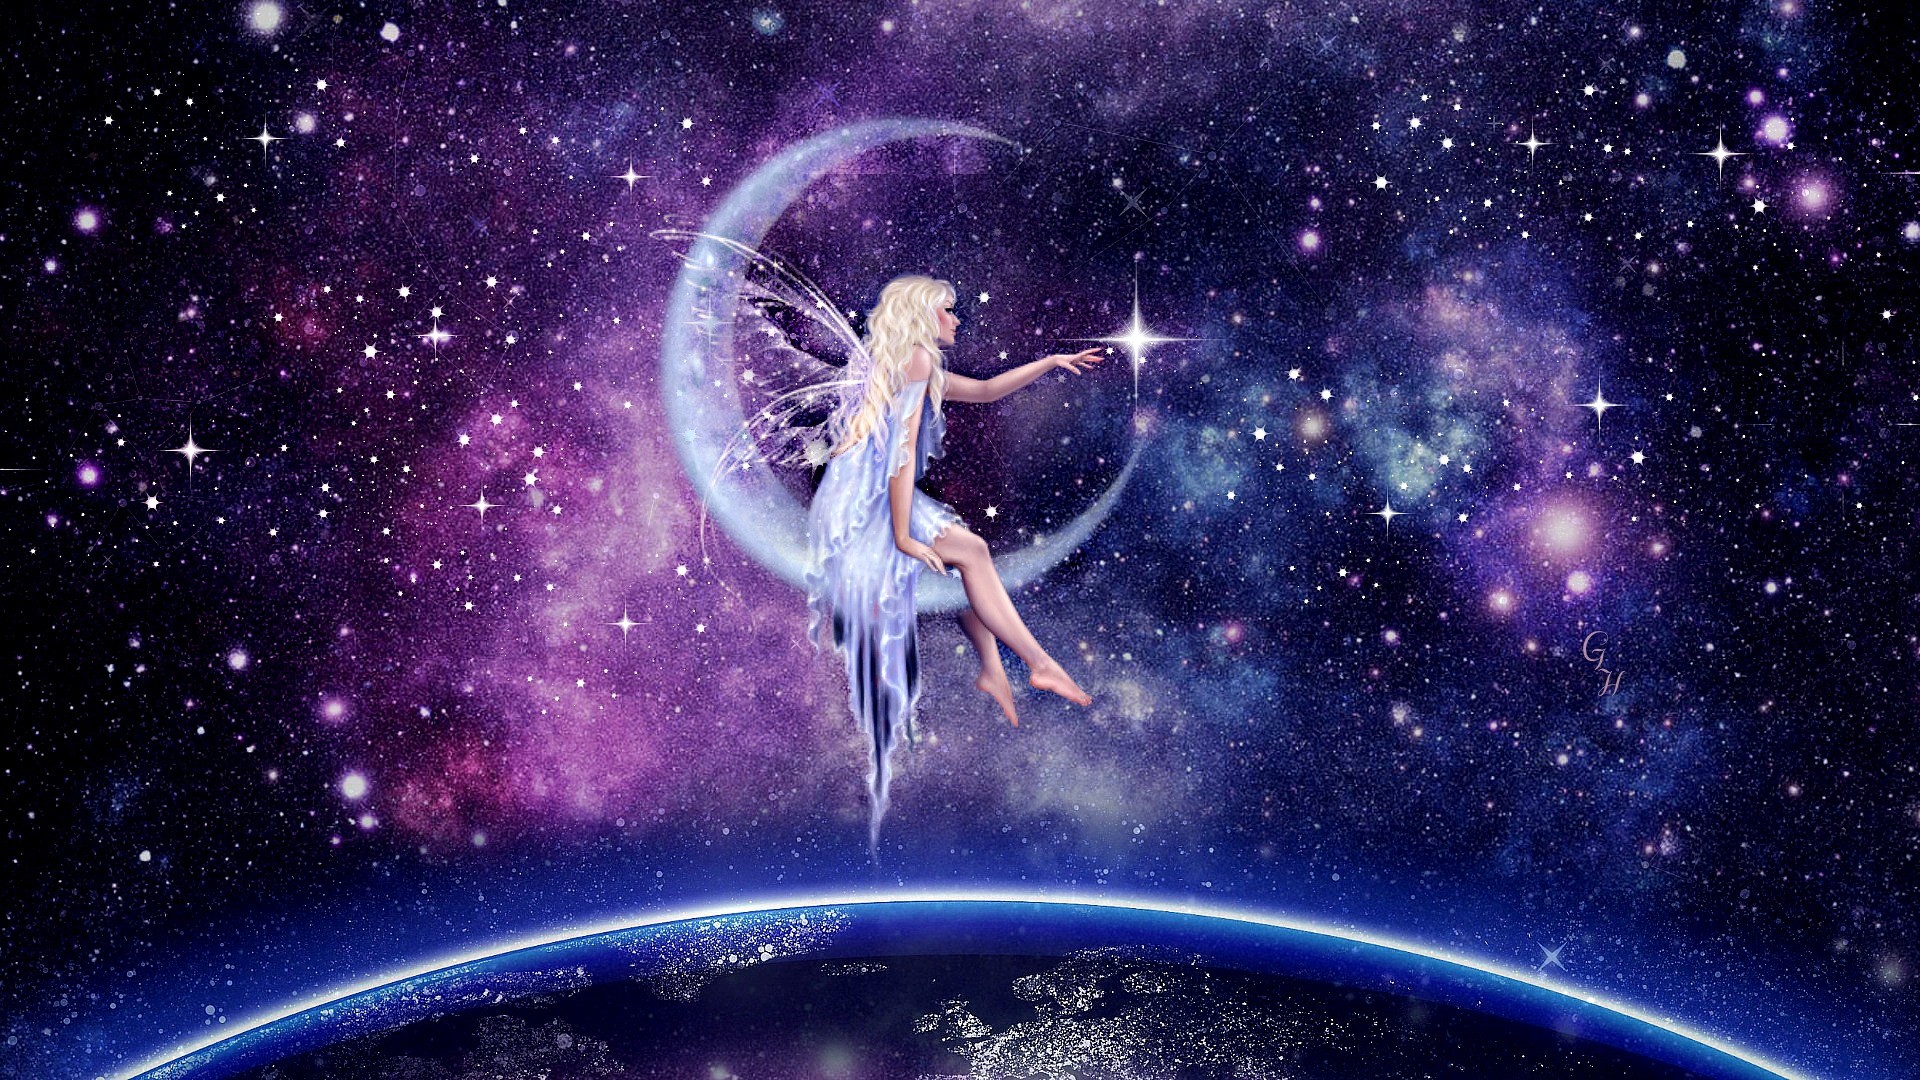 1920x1080 Fantasy images Fairy HD wallpaper and background photos